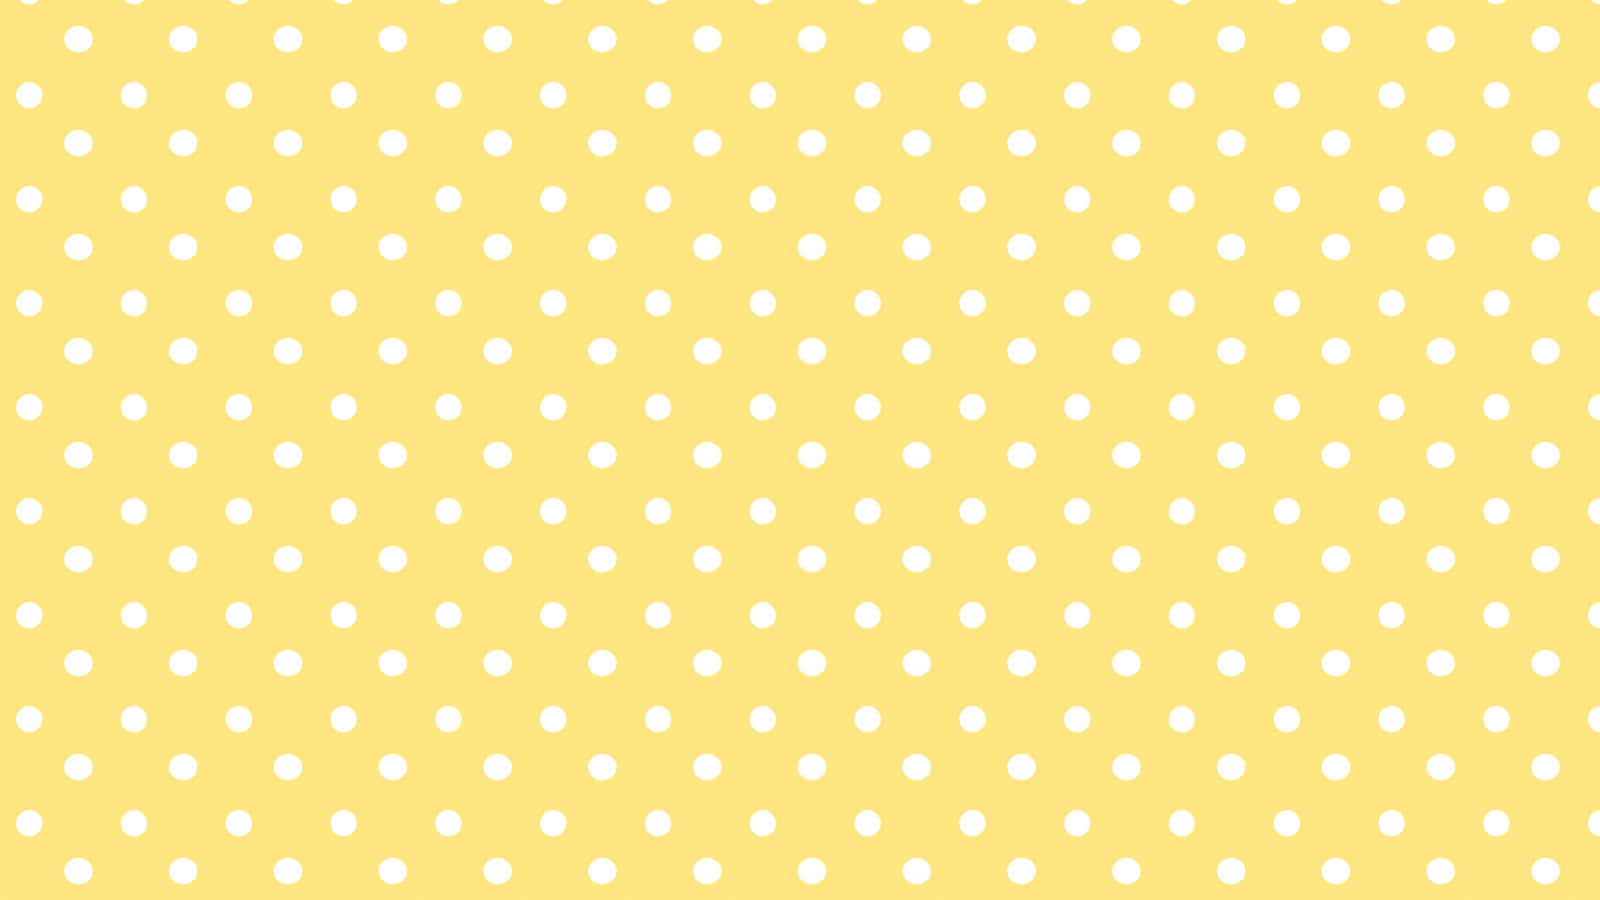 A cute yellow background, at once cheerful and serene.